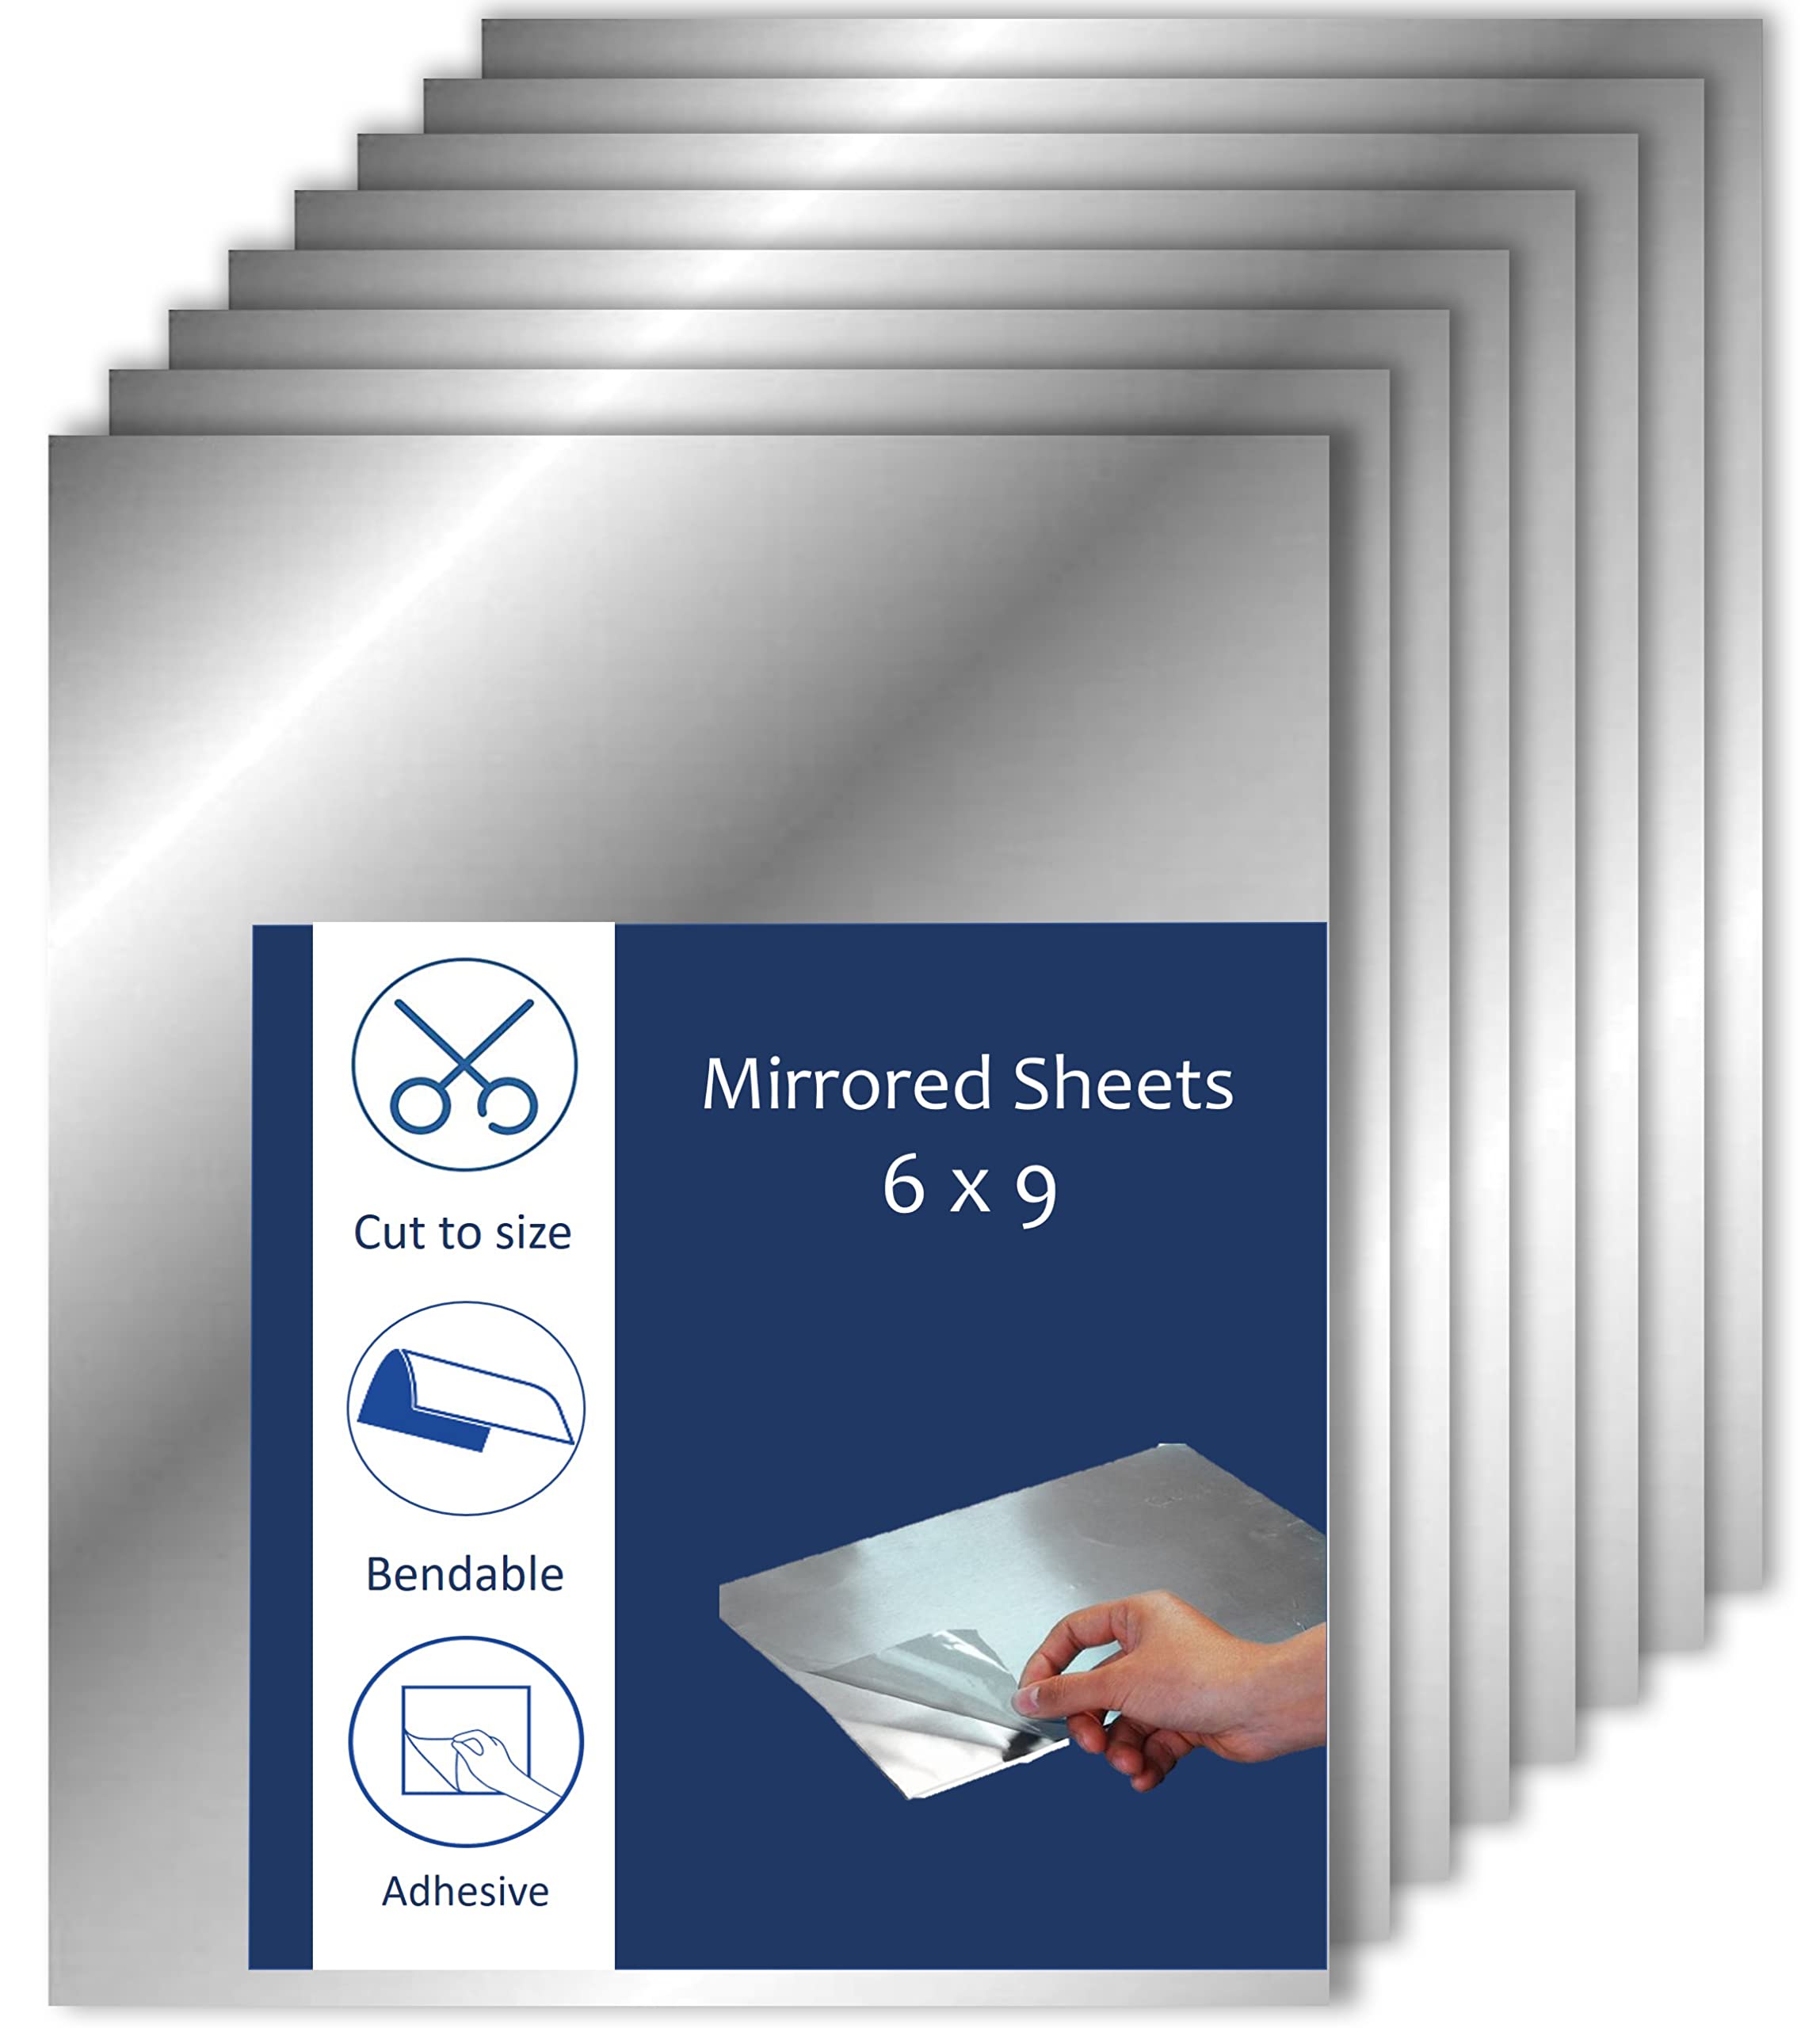 Quality Adhesive Mirror Sheet 6 x 9 Inches Flexible Mirrors Sheets, Non- Glass Self Adhesive Stick on Mirror Tiles, Cut Mirror Stickers to Size,  Peel and Stick, Great for Crafts and Mirror Wall